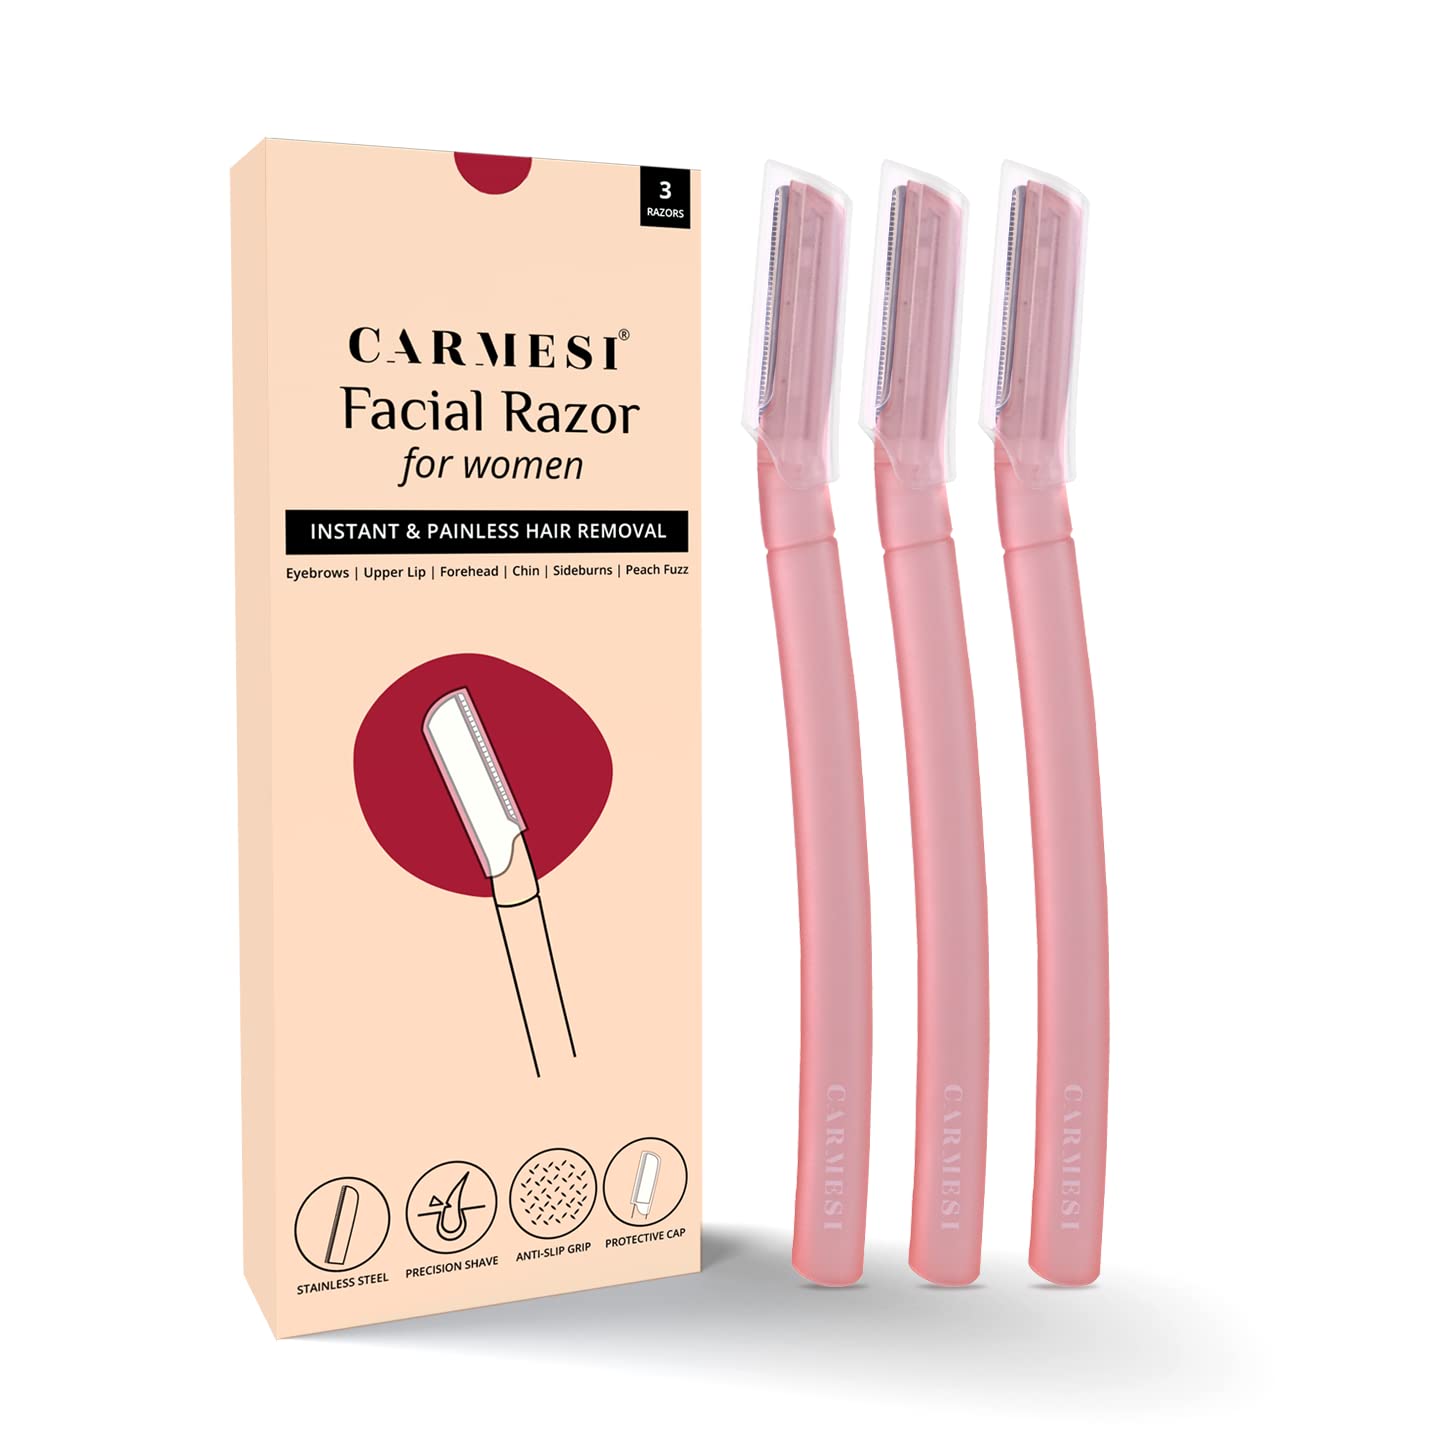 Carmesi Reusable Face Razor for Women Facial Hair- 3 Razors | Instant & Painless Hair Removal | For Eyebrows, Upper Lip, Forehead, Peach Fuzz, Chin and Sideburns | Dermaplaning Tool